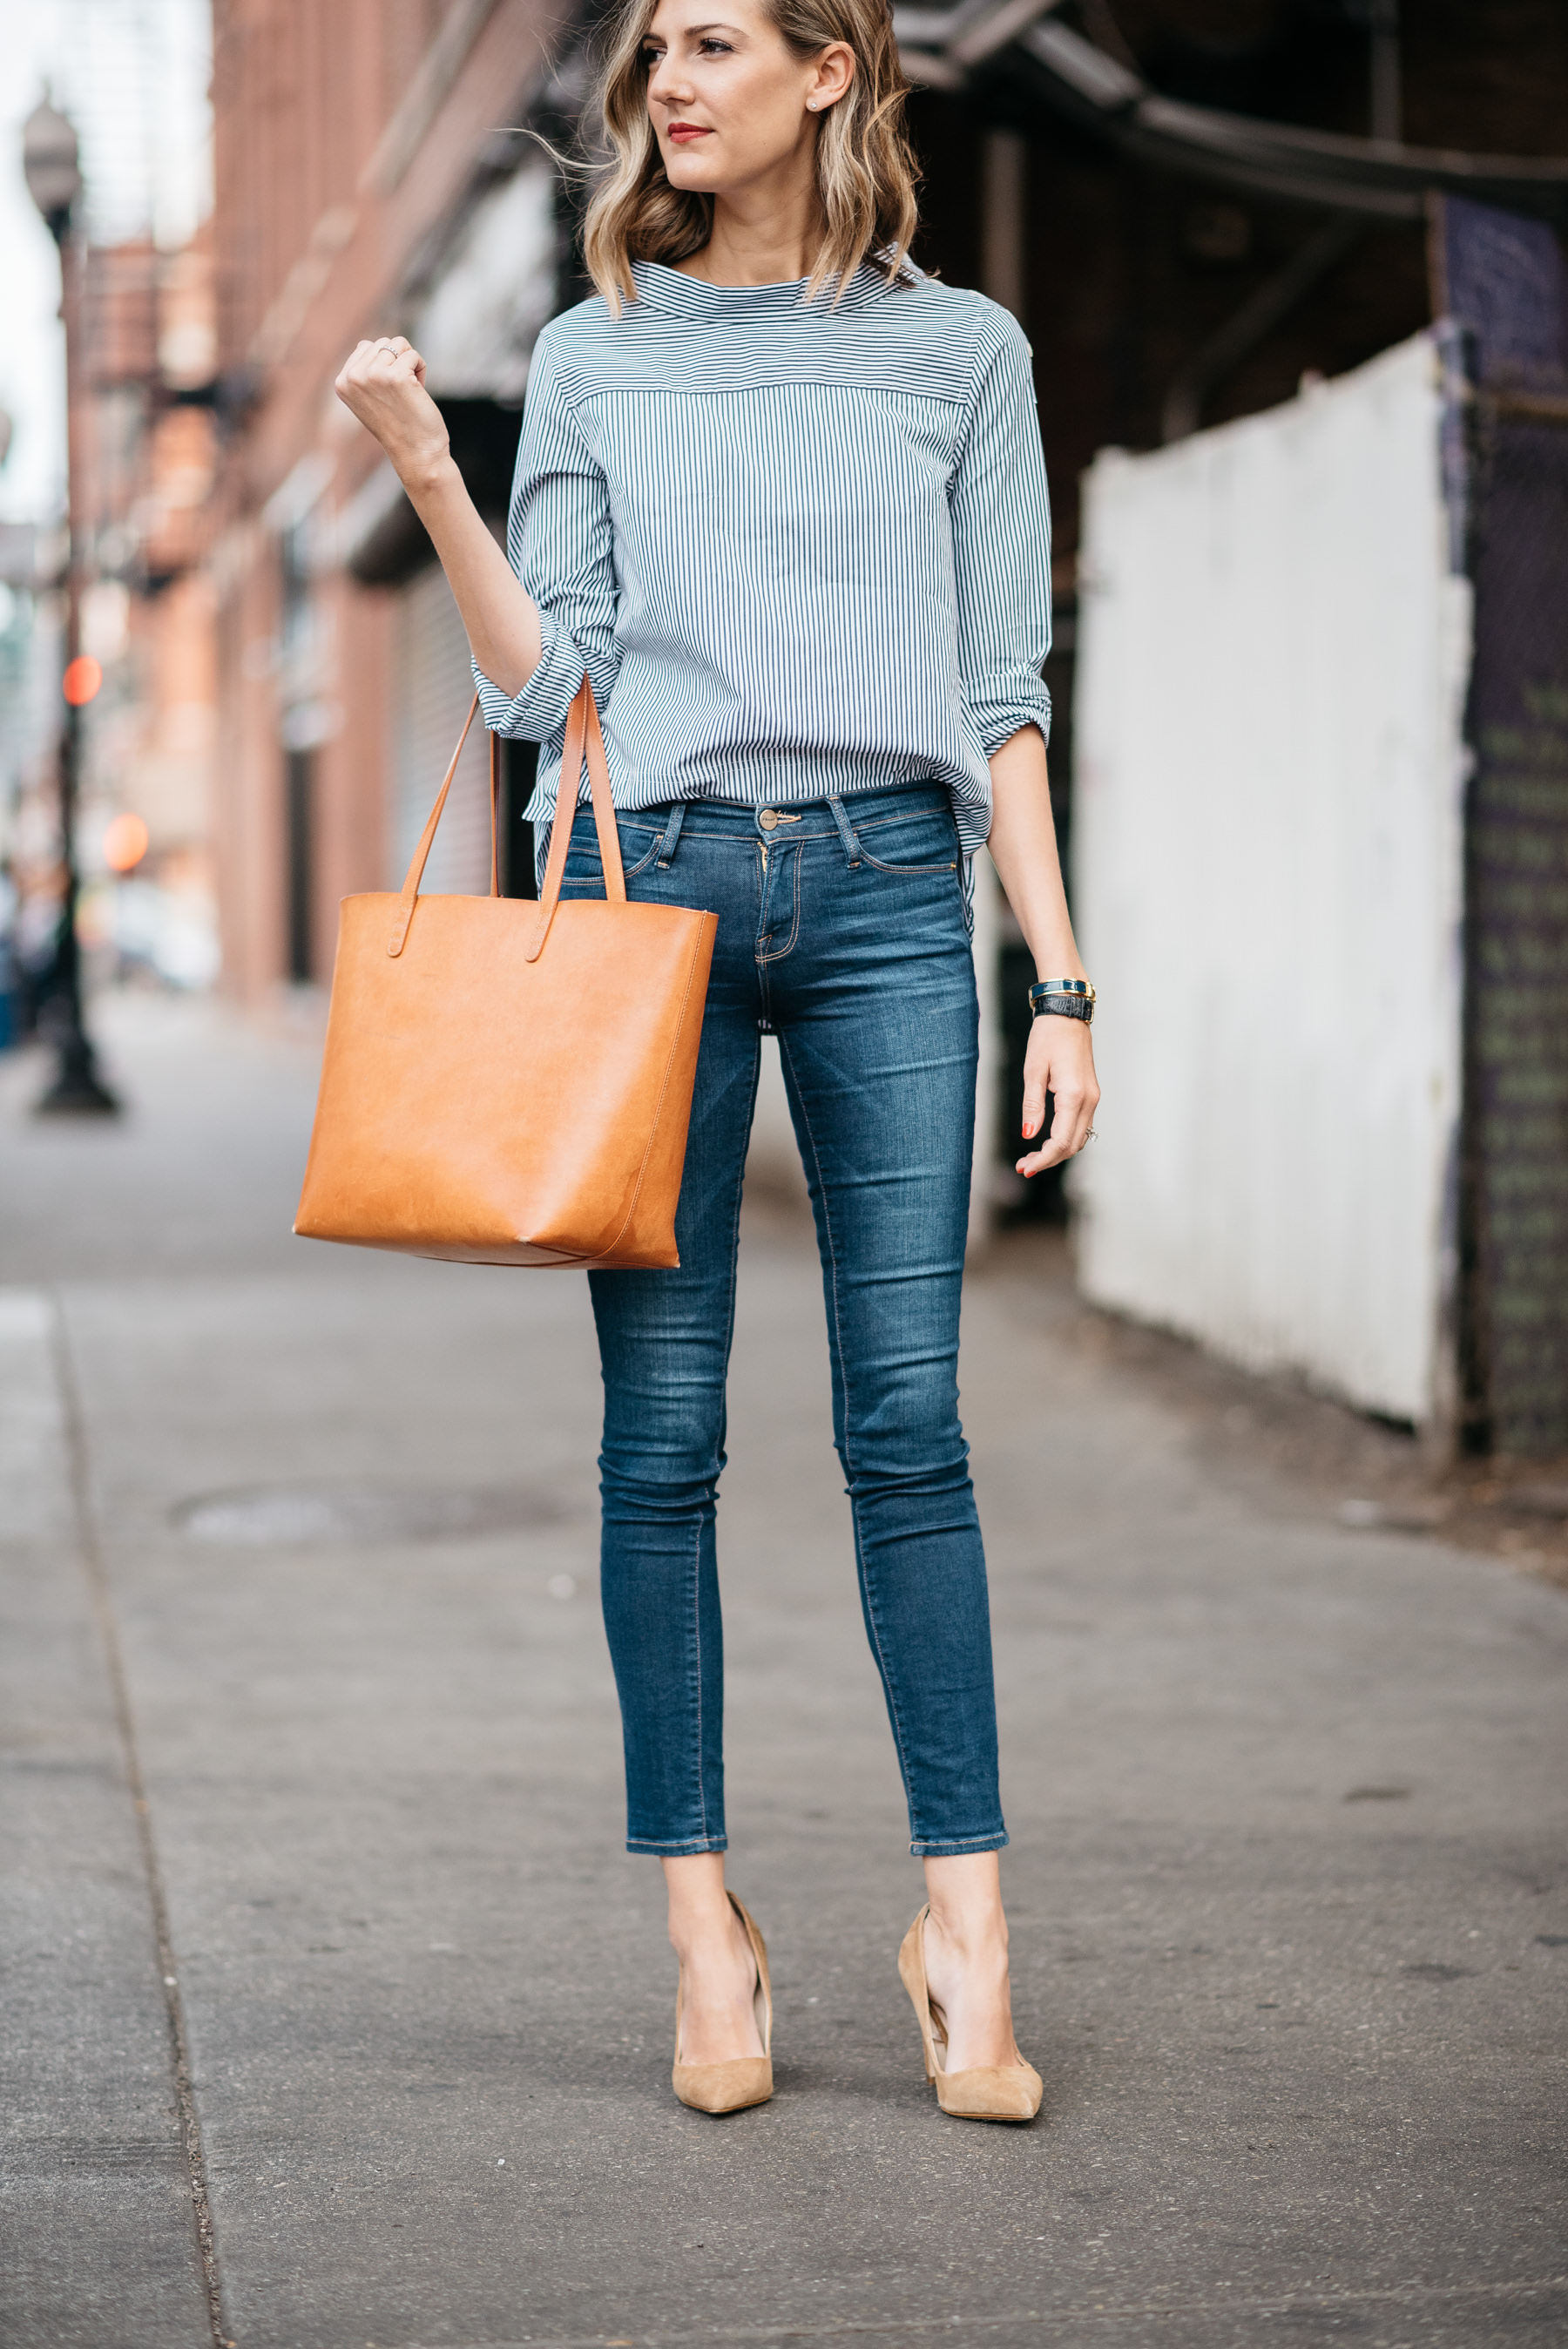 j crew funnel neck top how to style a mock neck shirt with jeans